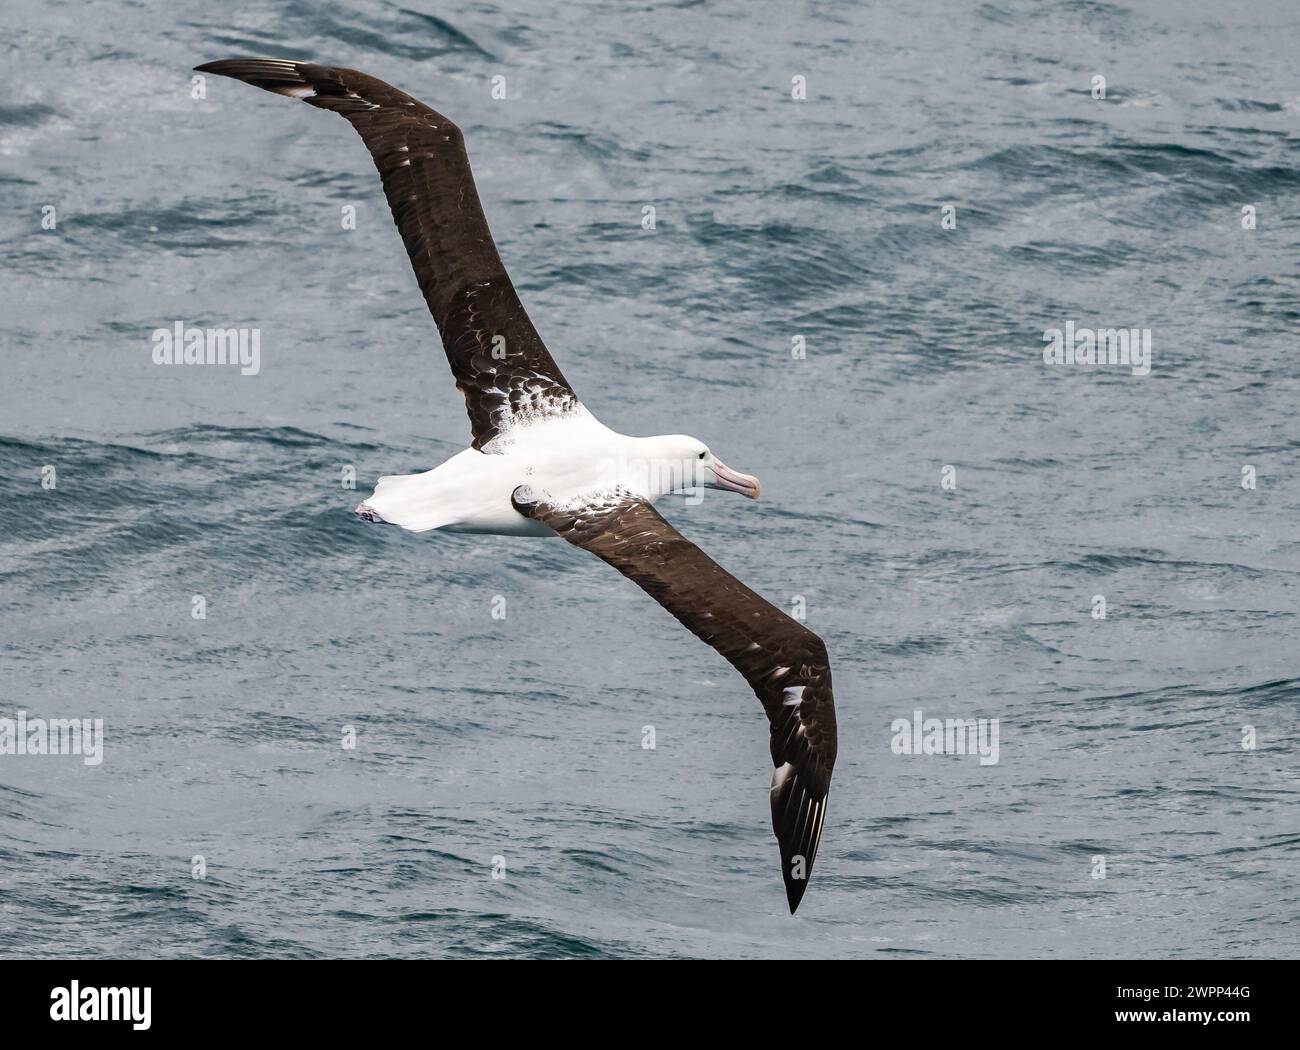 A Northern Royal Albatross (Diomedea sanfordi) flying over ocean. Pacific Ocean, off the coast of Chile. Stock Photo